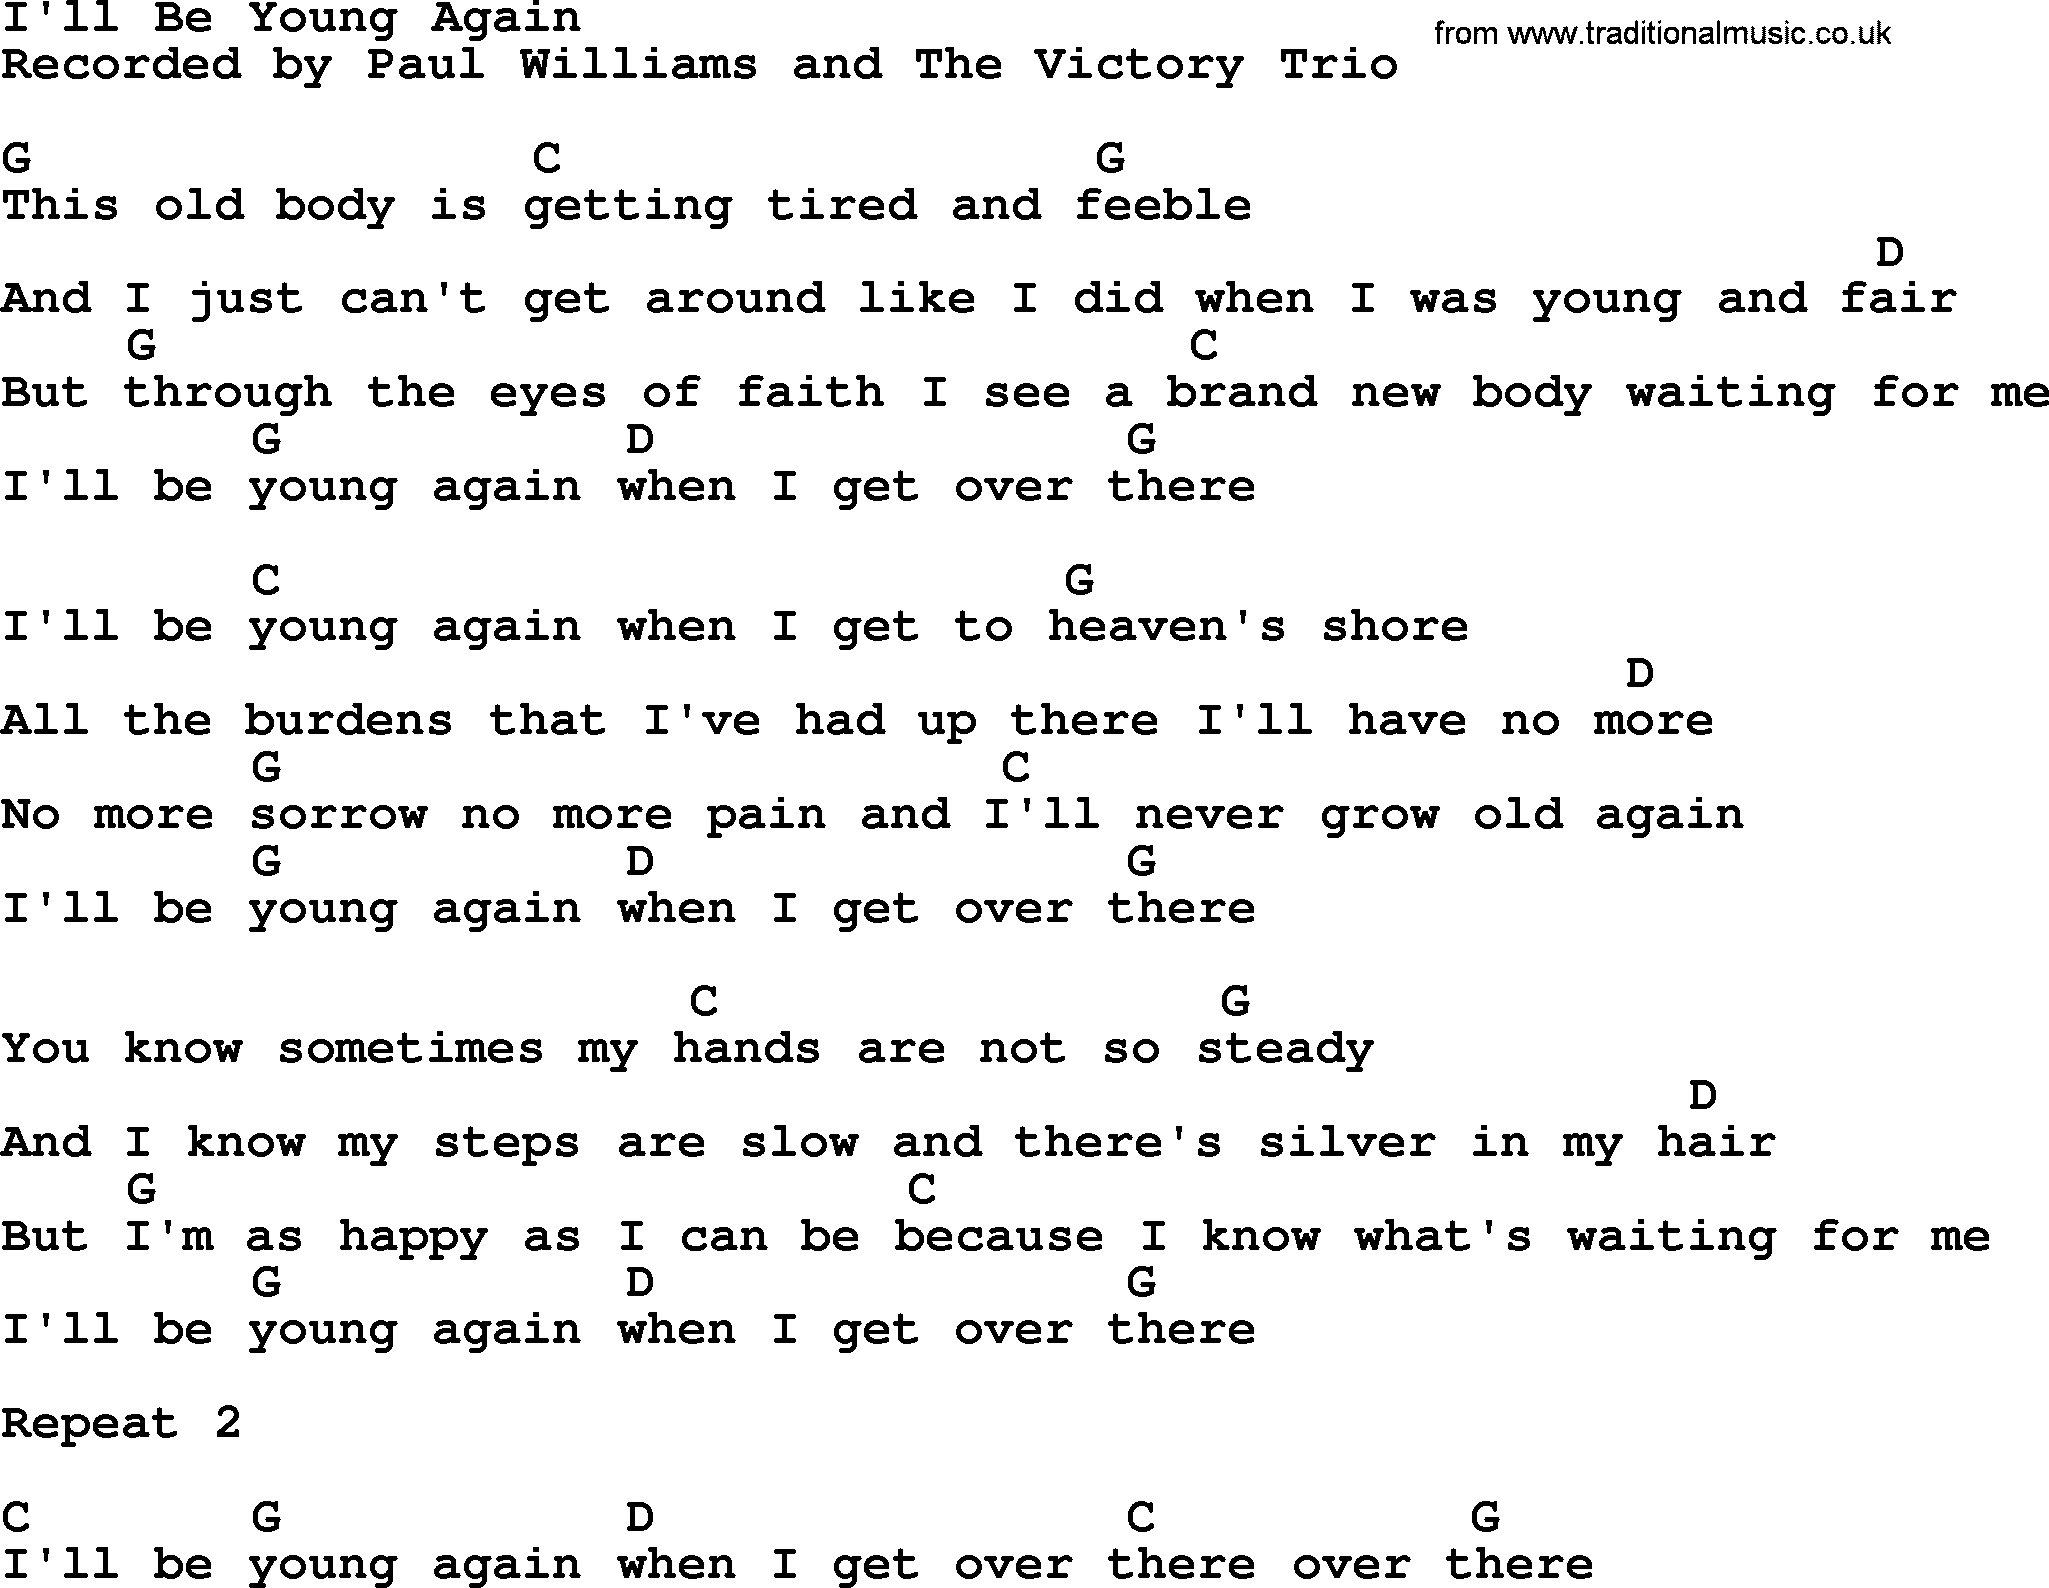 Bluegrass song: I'll Be Young Again, lyrics and chords